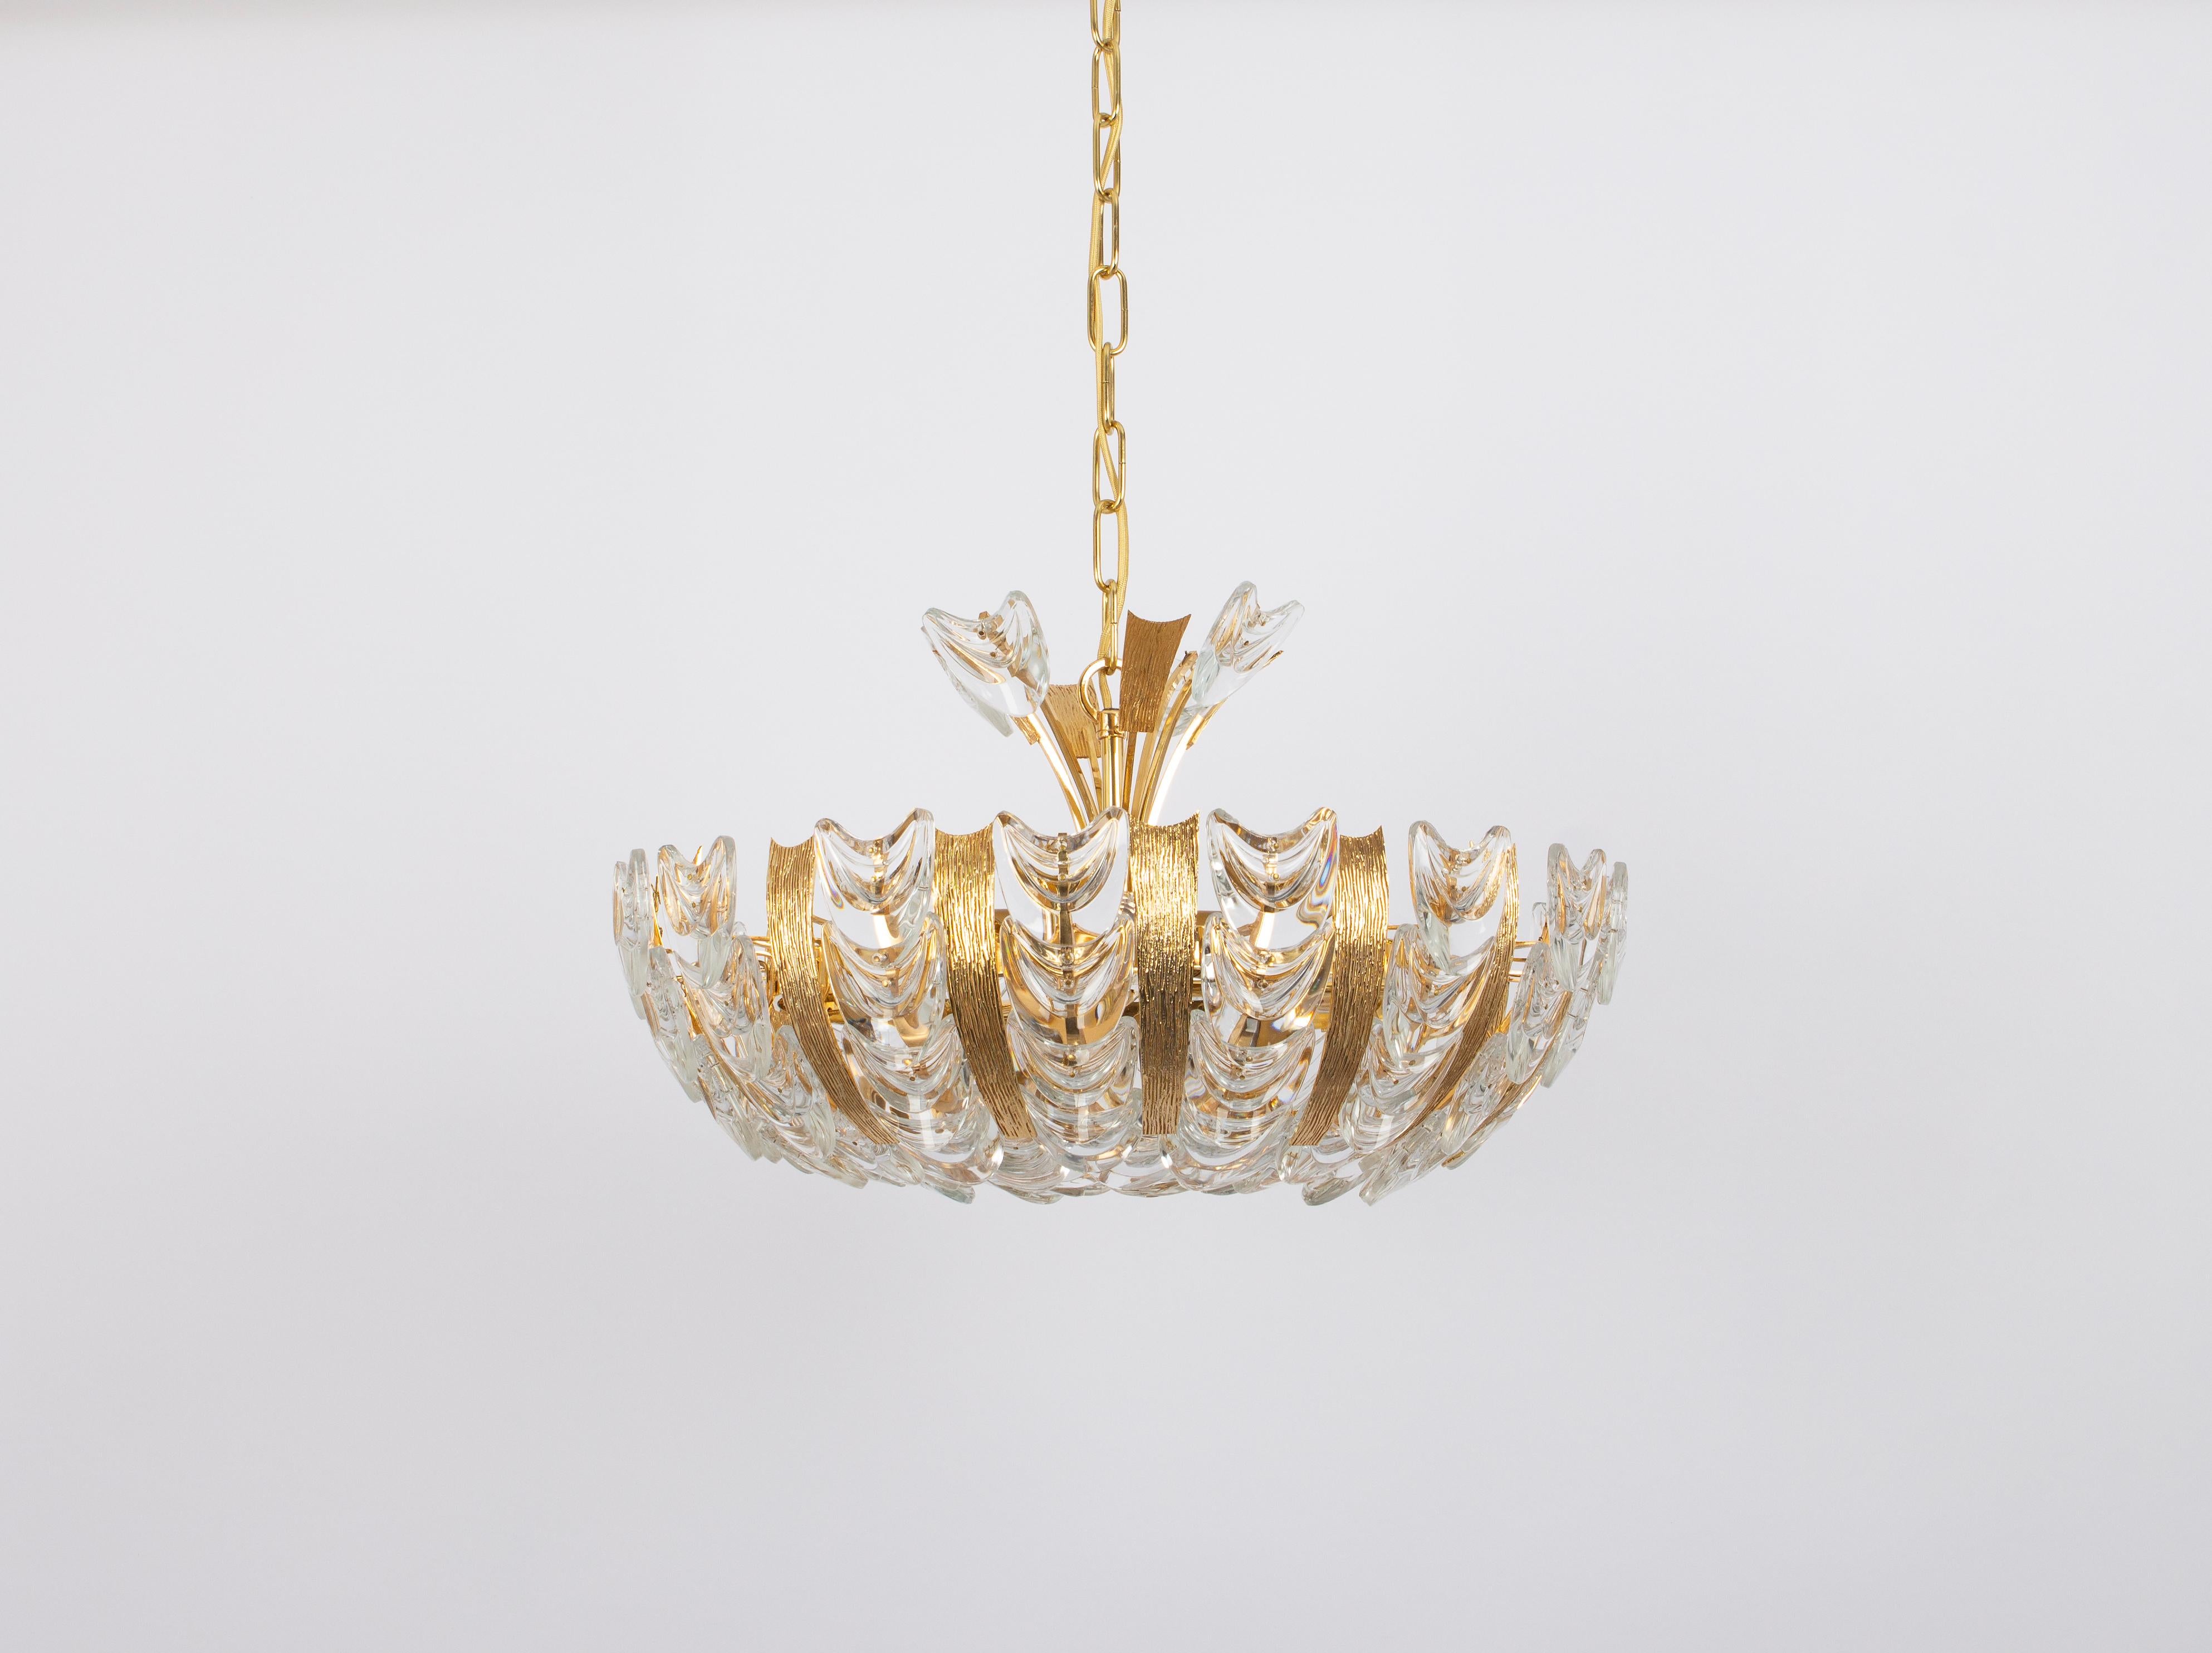 Delicate floral chandelier with crystal glass and gilded brass parts made by Palwa, Germany, 1970s. Featuring a multitude of crystal glass flowers.
Measures: Diameter 18.5